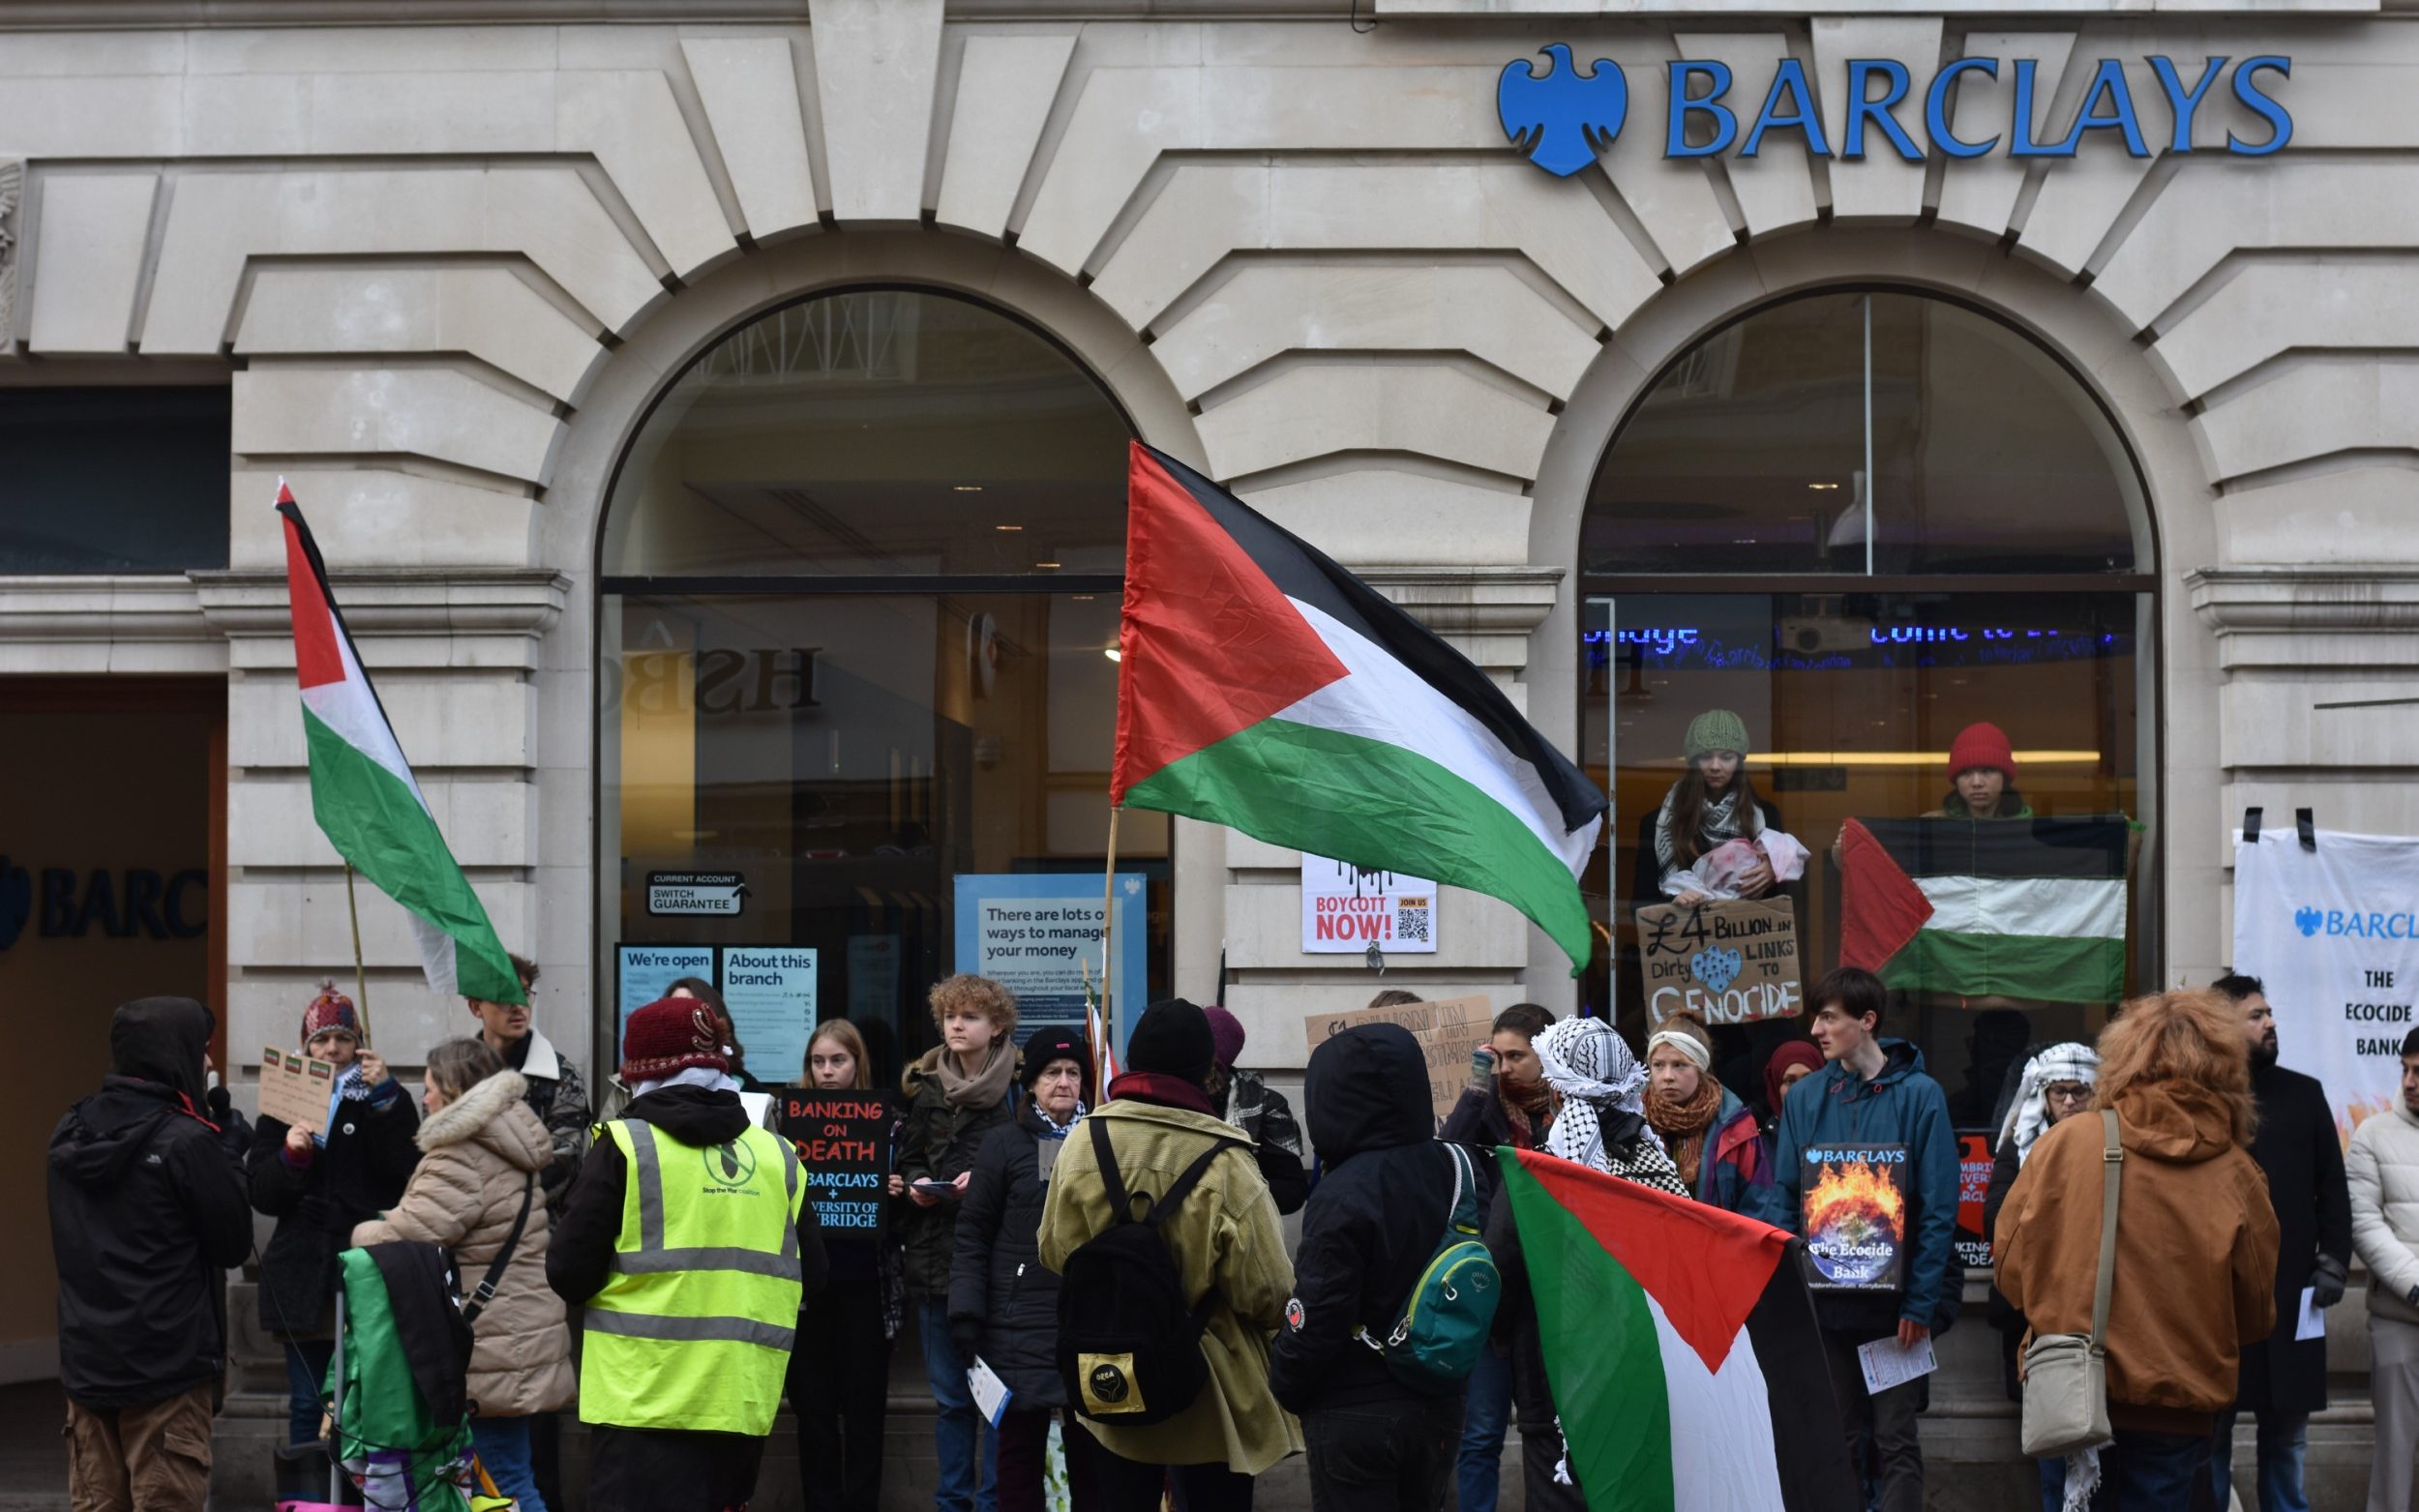 cambridge students stage ‘die-in’ at barclays bank to protest against israel and fossil fuels